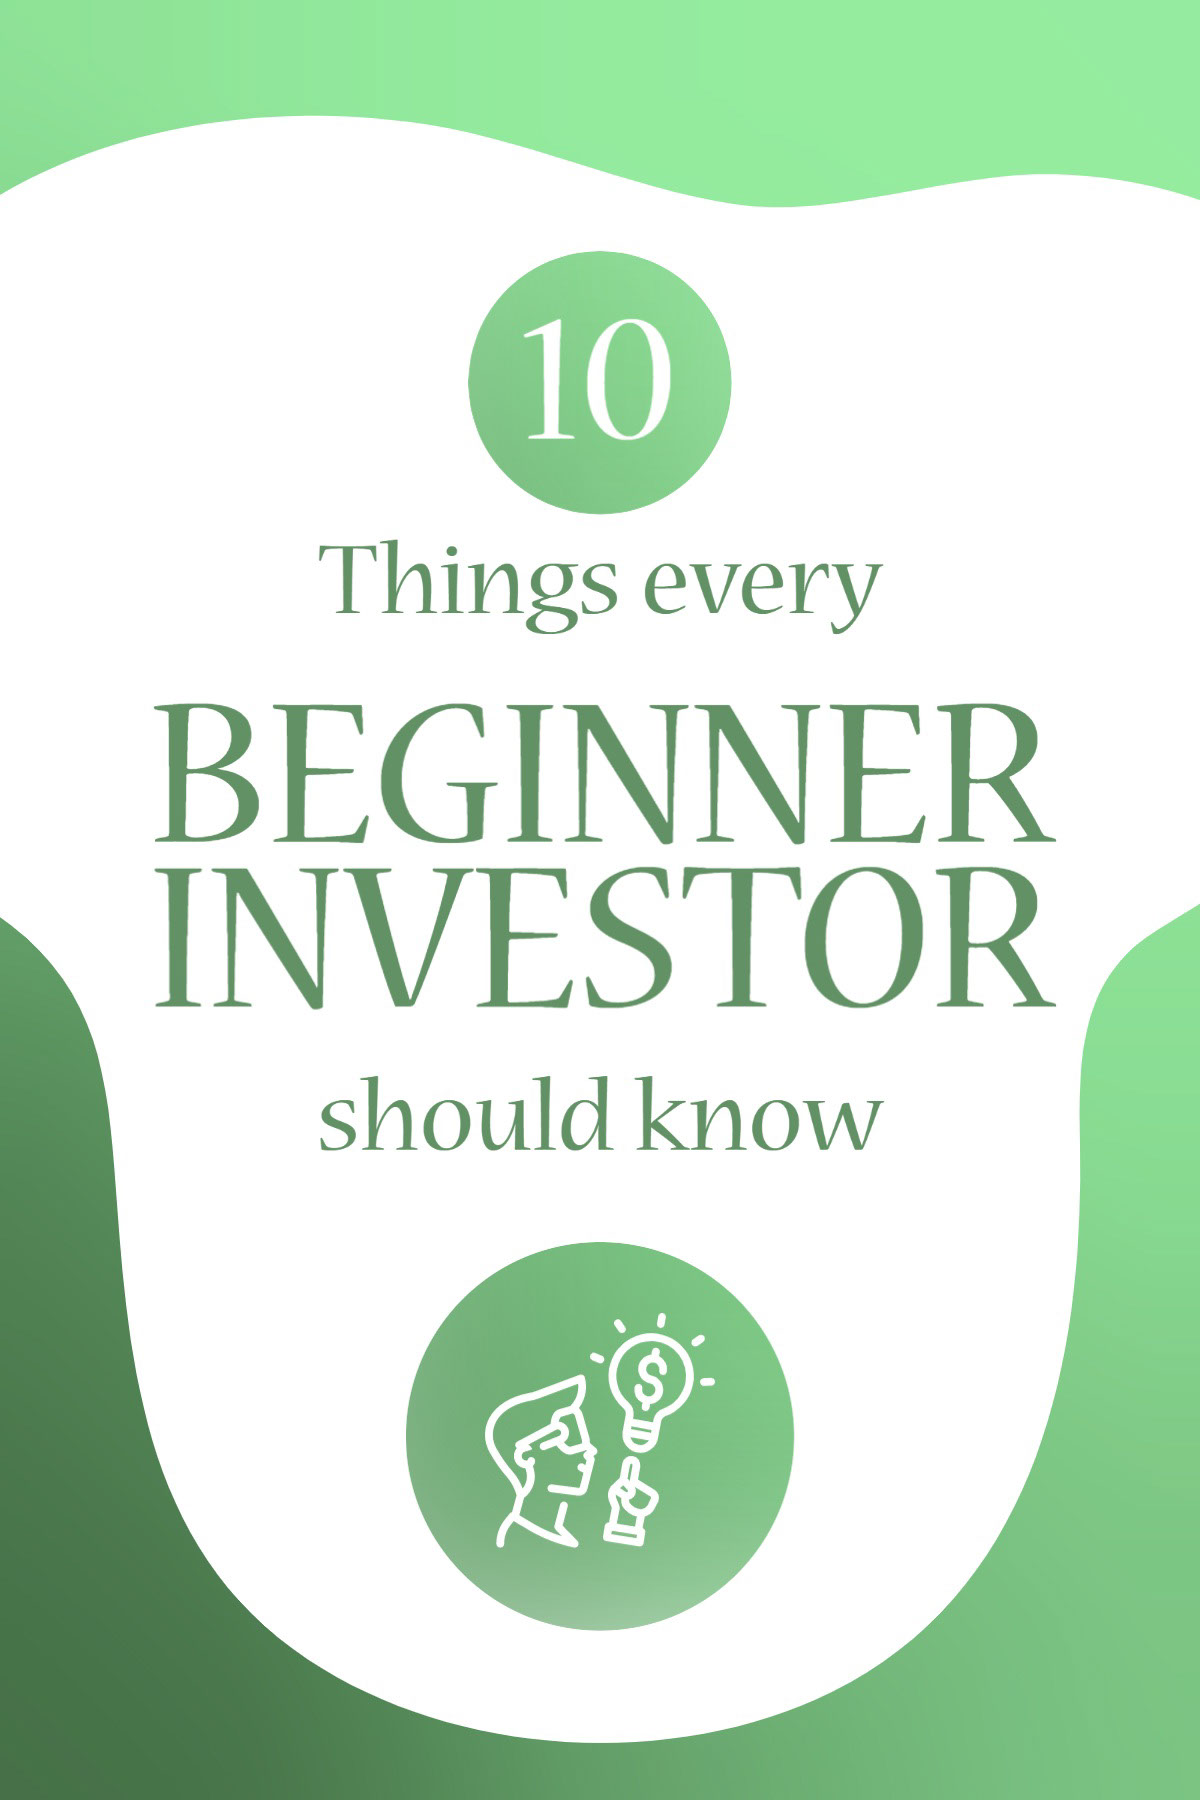 Green Gradient Investing Tips Pinterest Post beginner investor 10 should know Things every